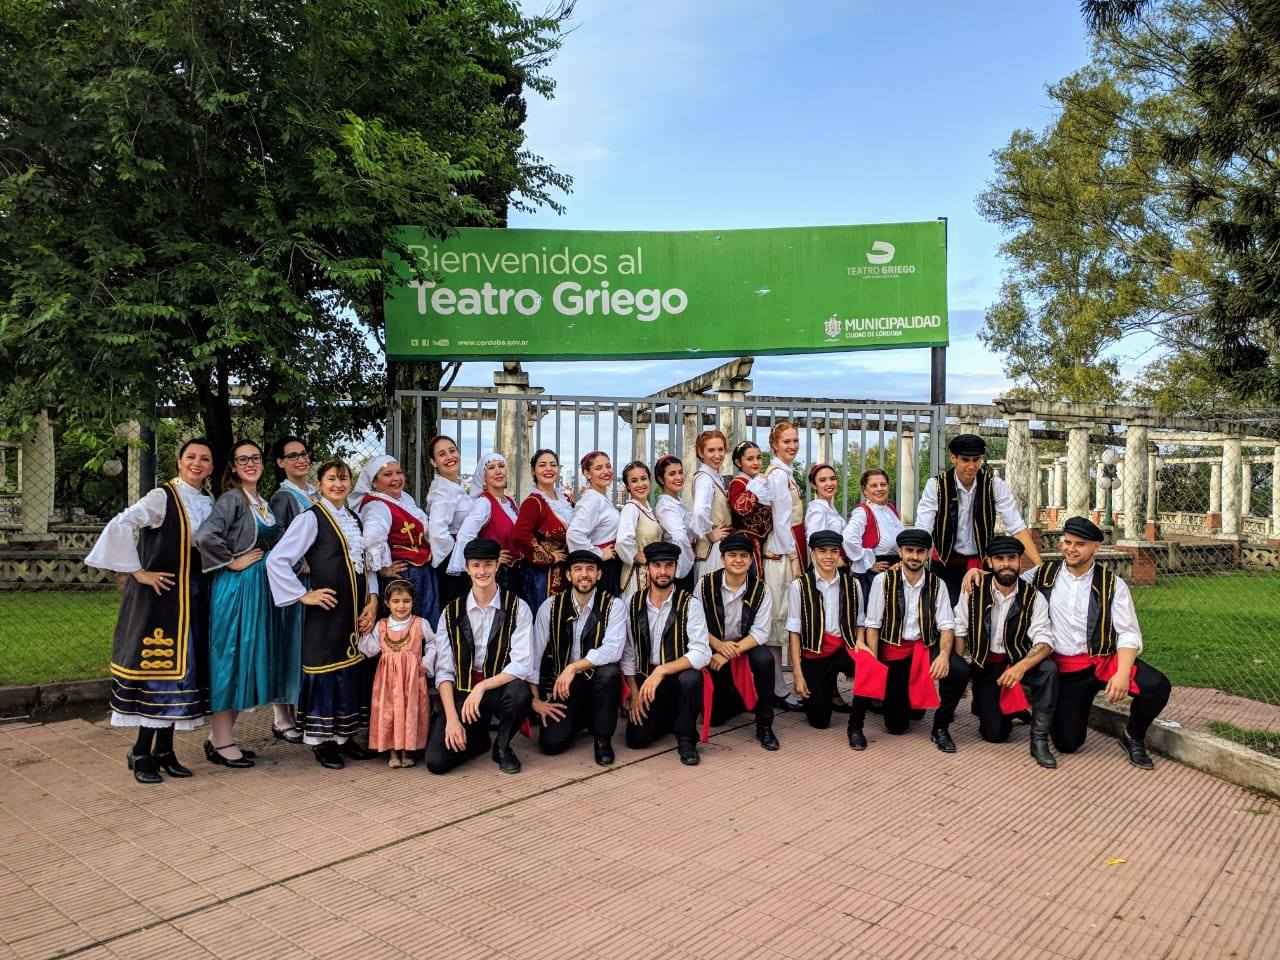 Members of the Hellenic community of Cordoba Argentina